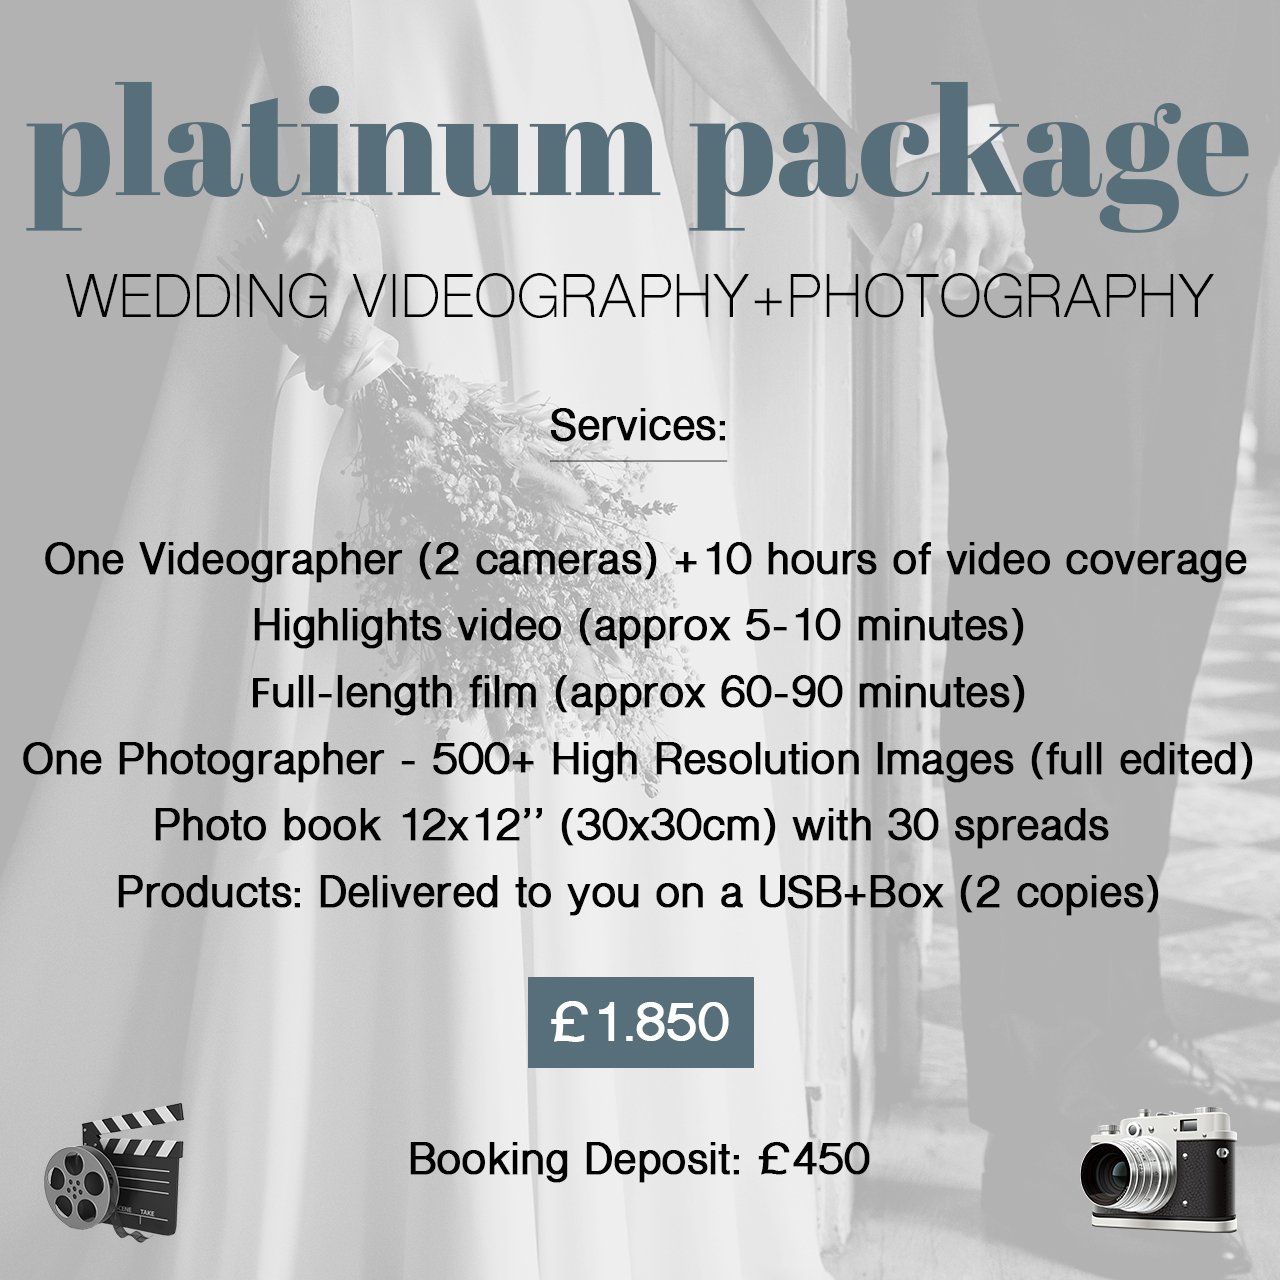 North East Wedding Videography, North East Wedding Photography